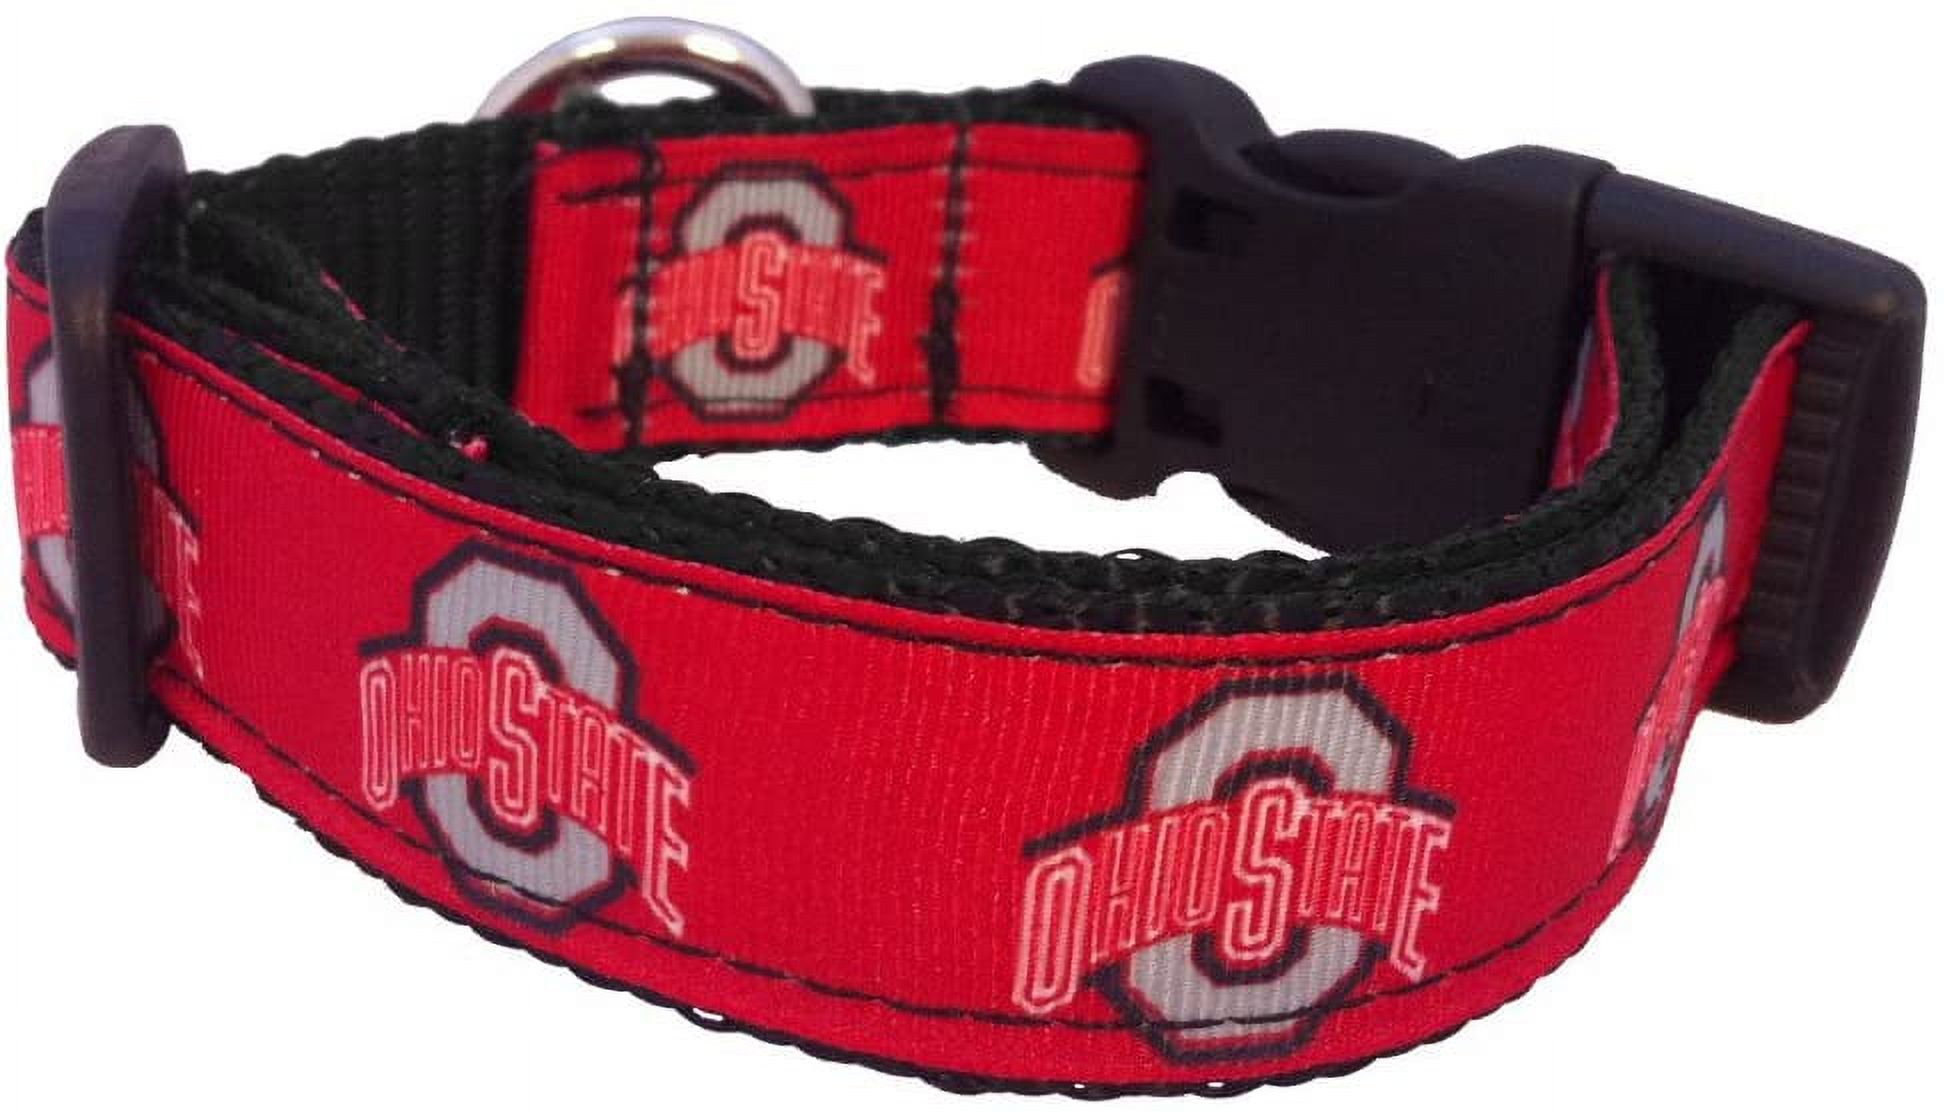 Brand New Ohio/State Small Pet Dog Collar(1 Inch Wide, 8-14 Inch Long), and Small Leash(5/8 Inch Wide, 6 Feet Long) Bundle, Official Team Logo/Red Color - image 3 of 3